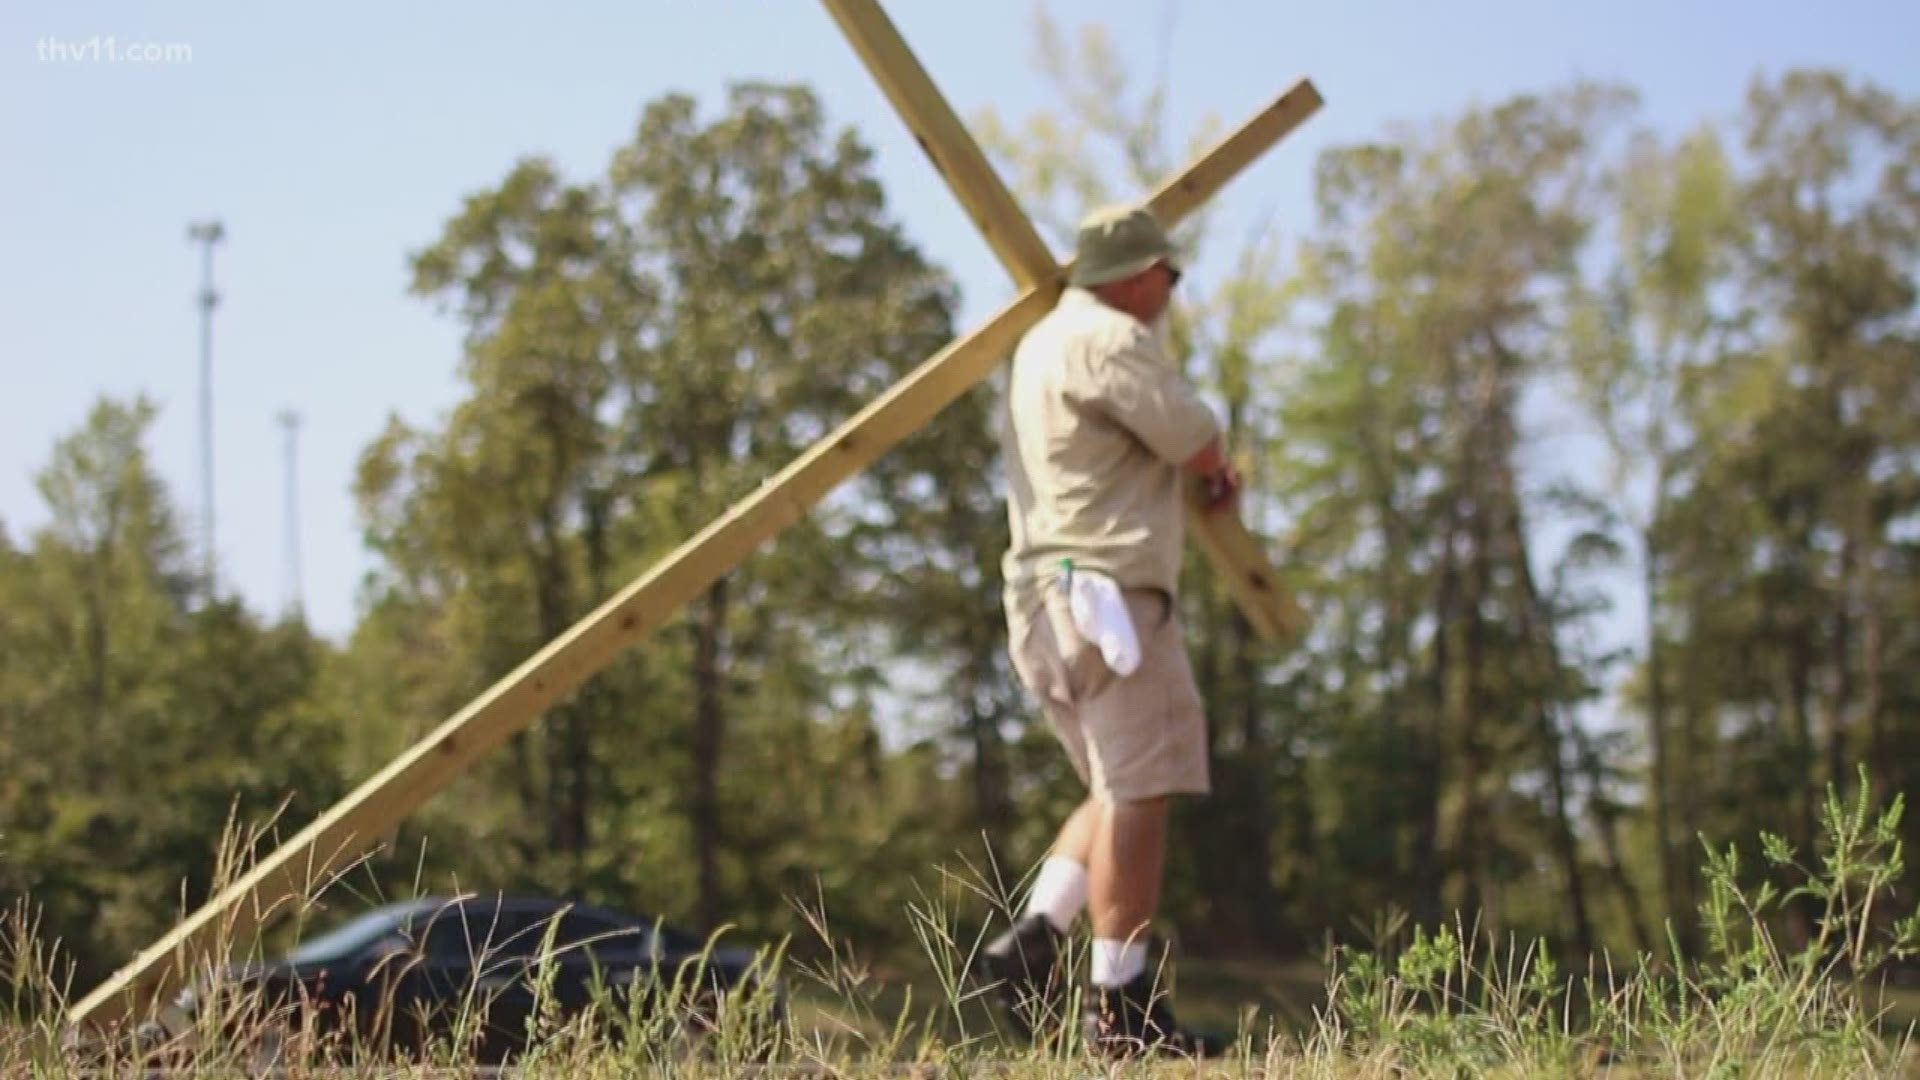 Laura Monteverdi got a chance to talk with a man who has been carrying a cross along Highway 70 in Arkansas. The 64-year-old starts most of his mornings this way.